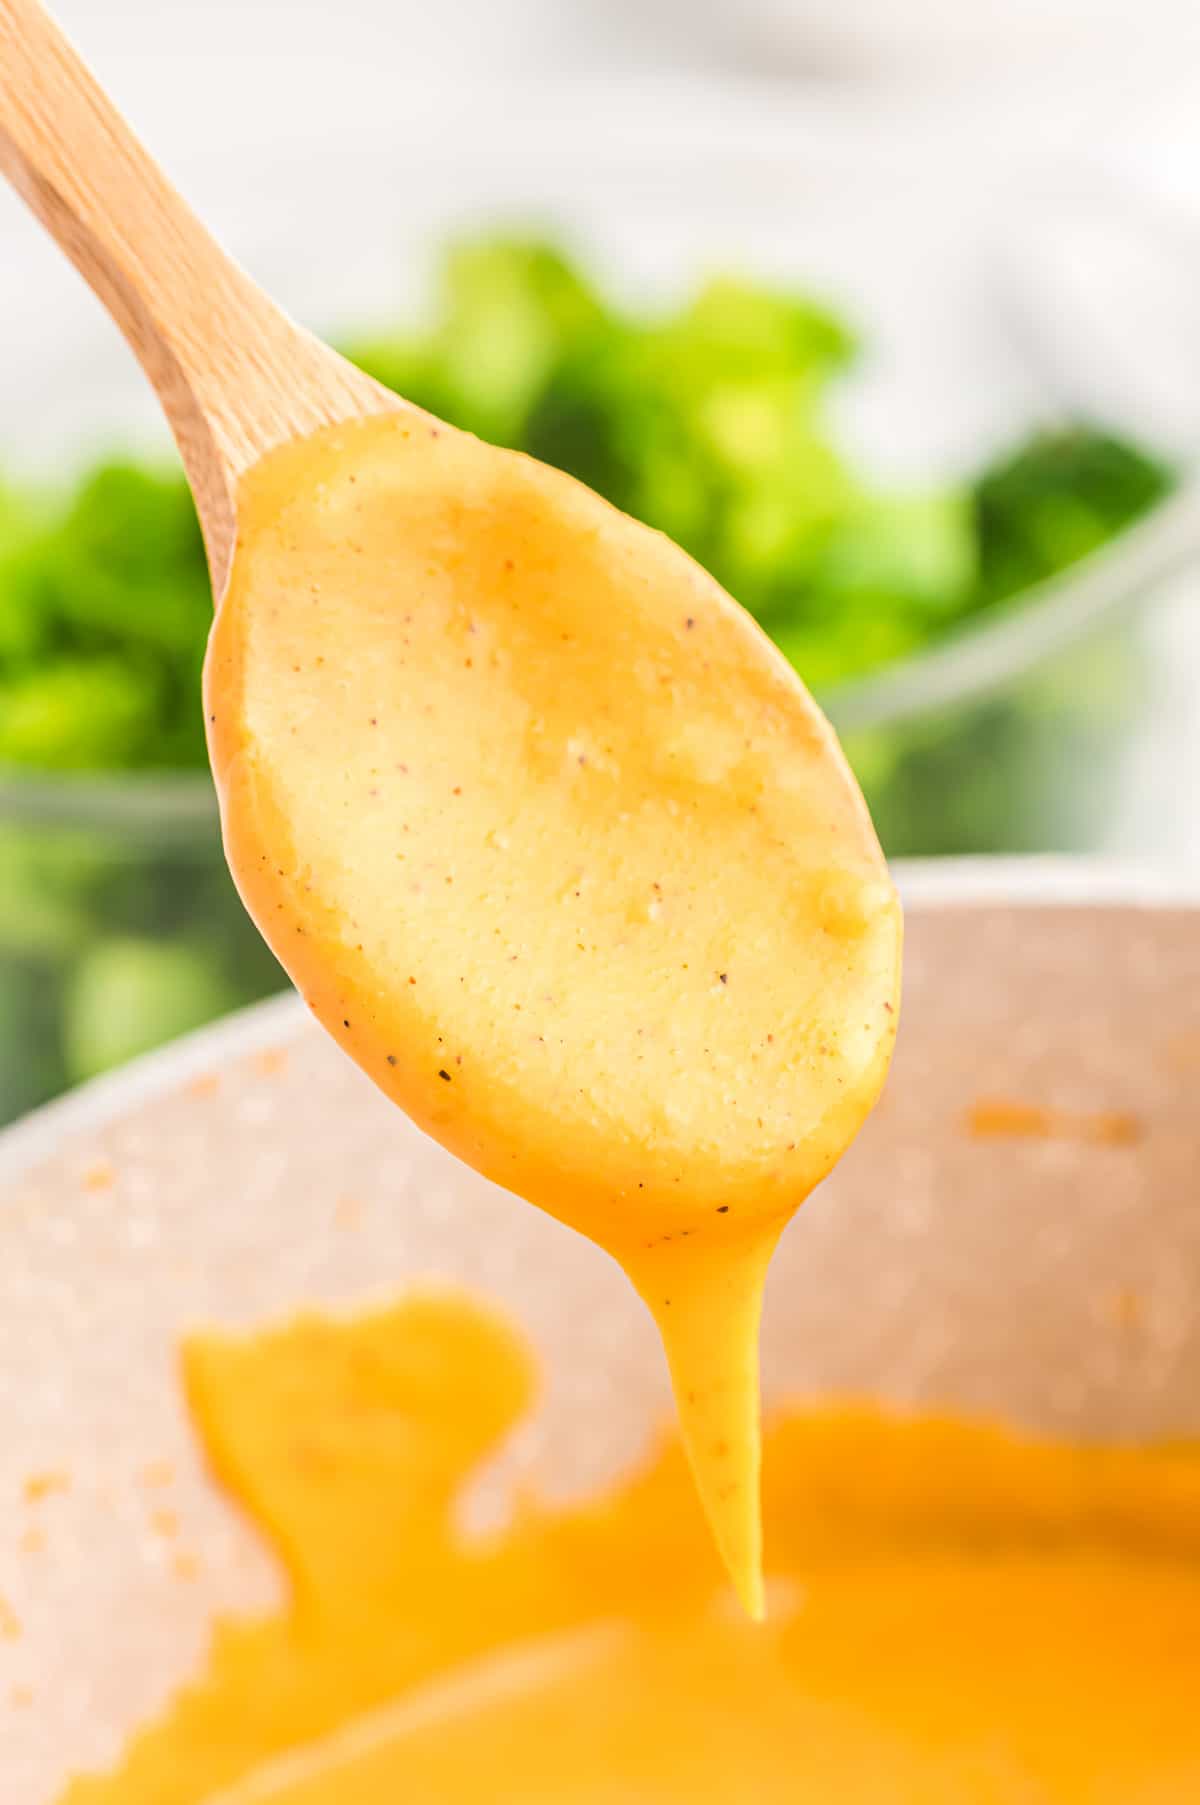 spoon dripping with cheese sauce